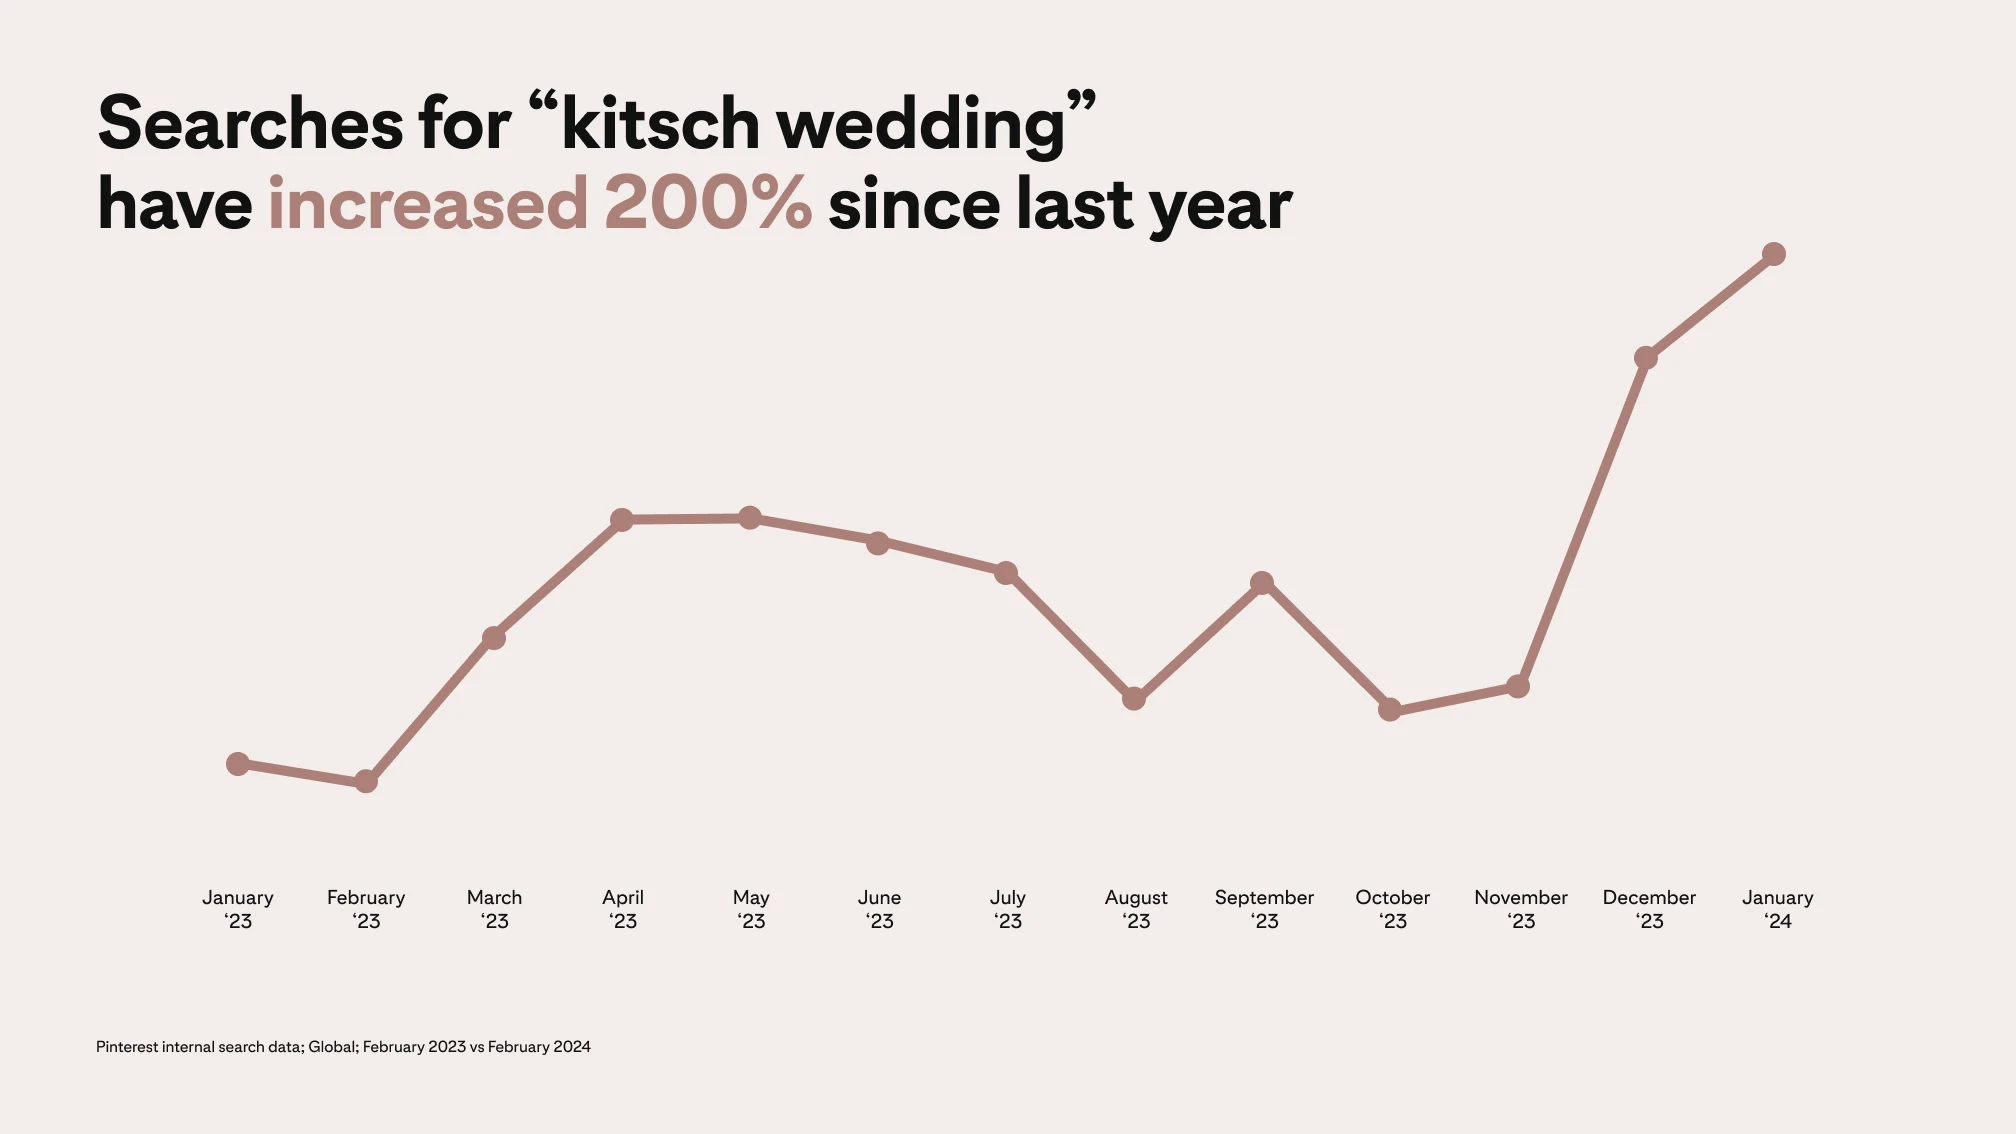 A line graph shows that Pinterest searches for "kitsch wedding" have increased 200% since last year